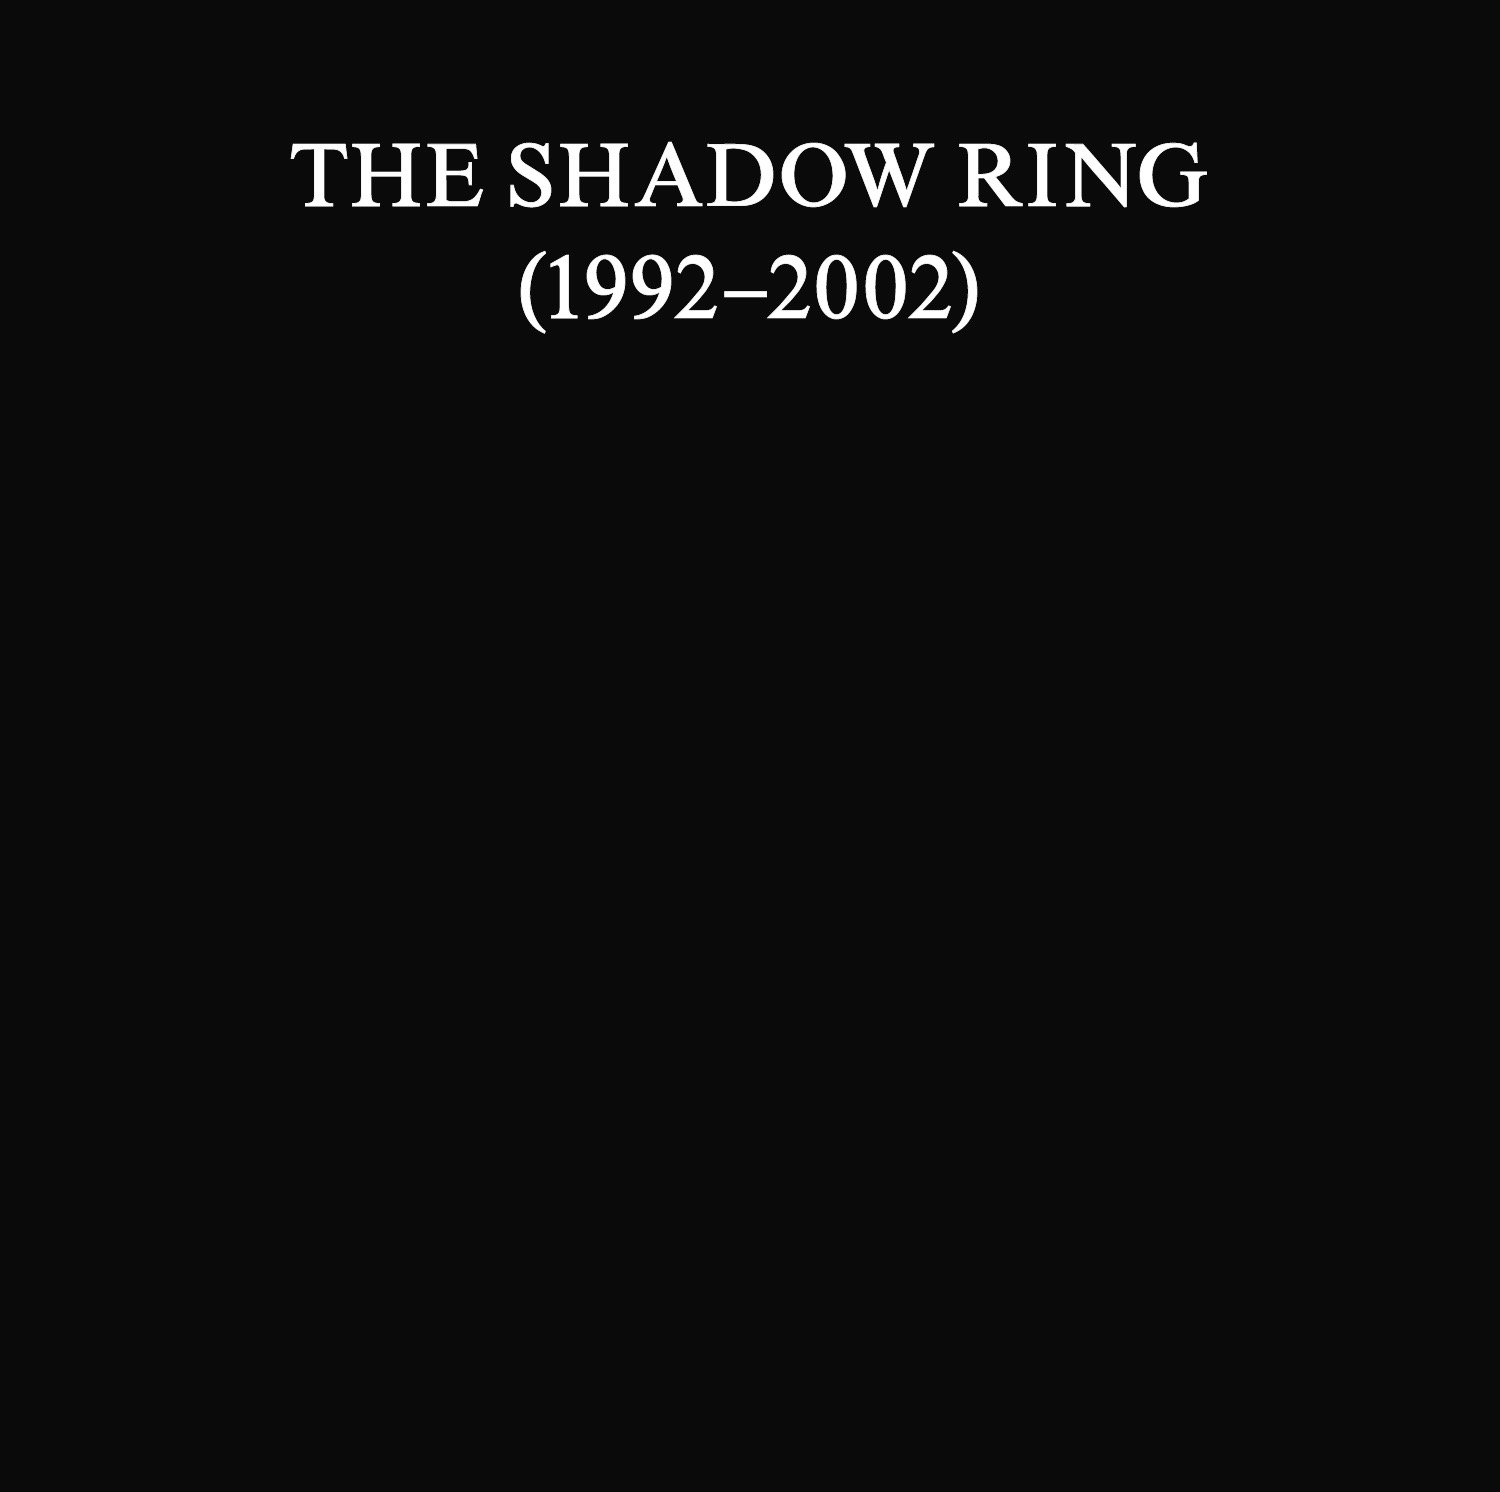 Shadow Runner Discography